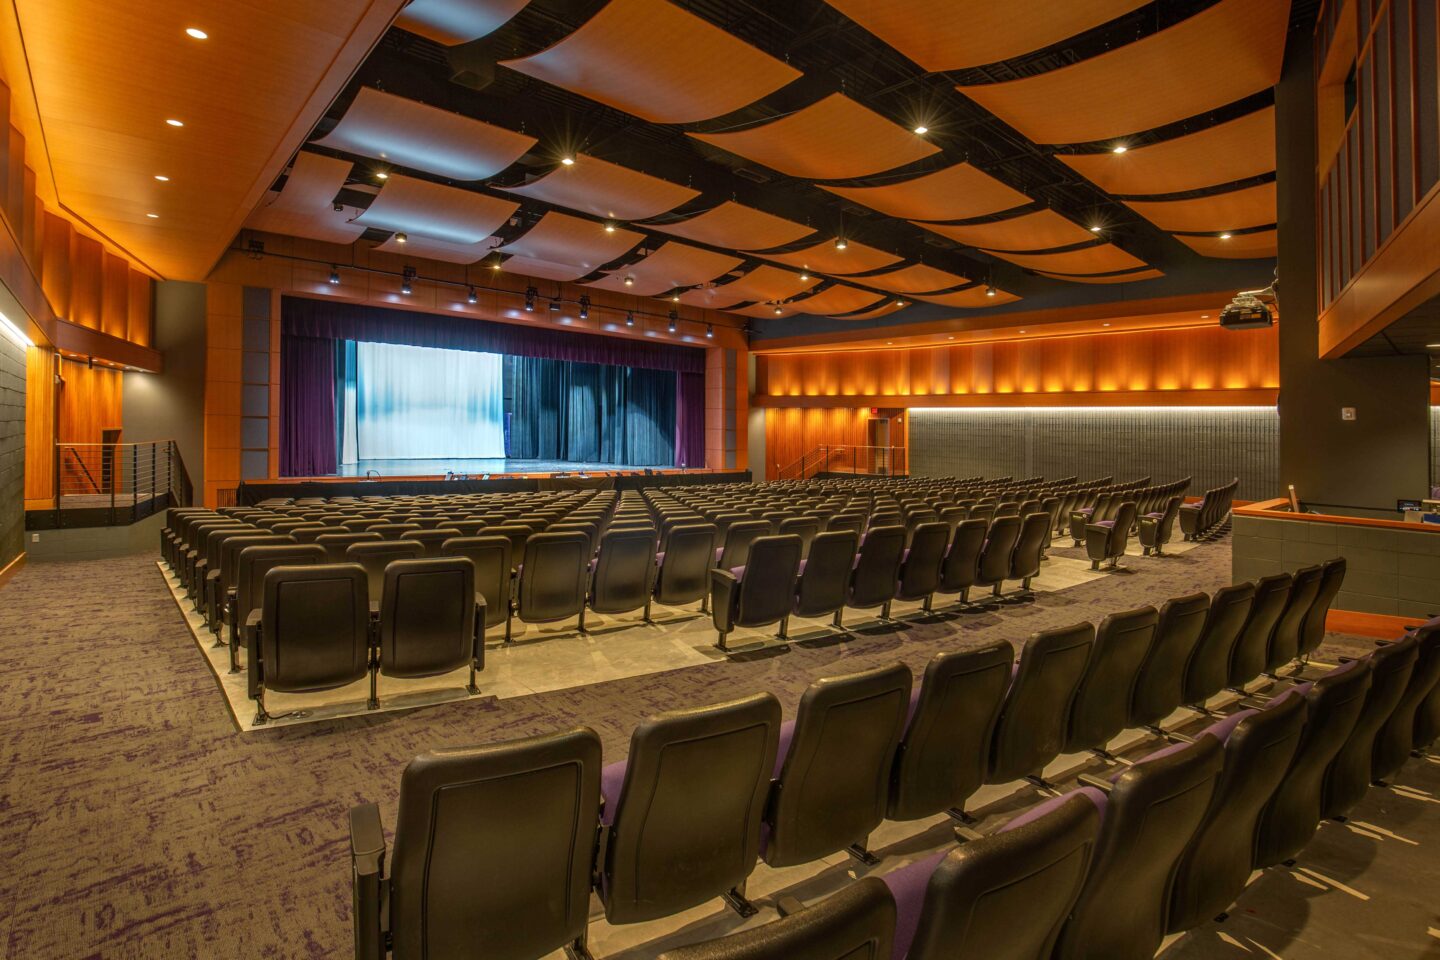 A view of the renovated auditorium featuring a large stage, new seating, and acoustic wall and ceiling panels